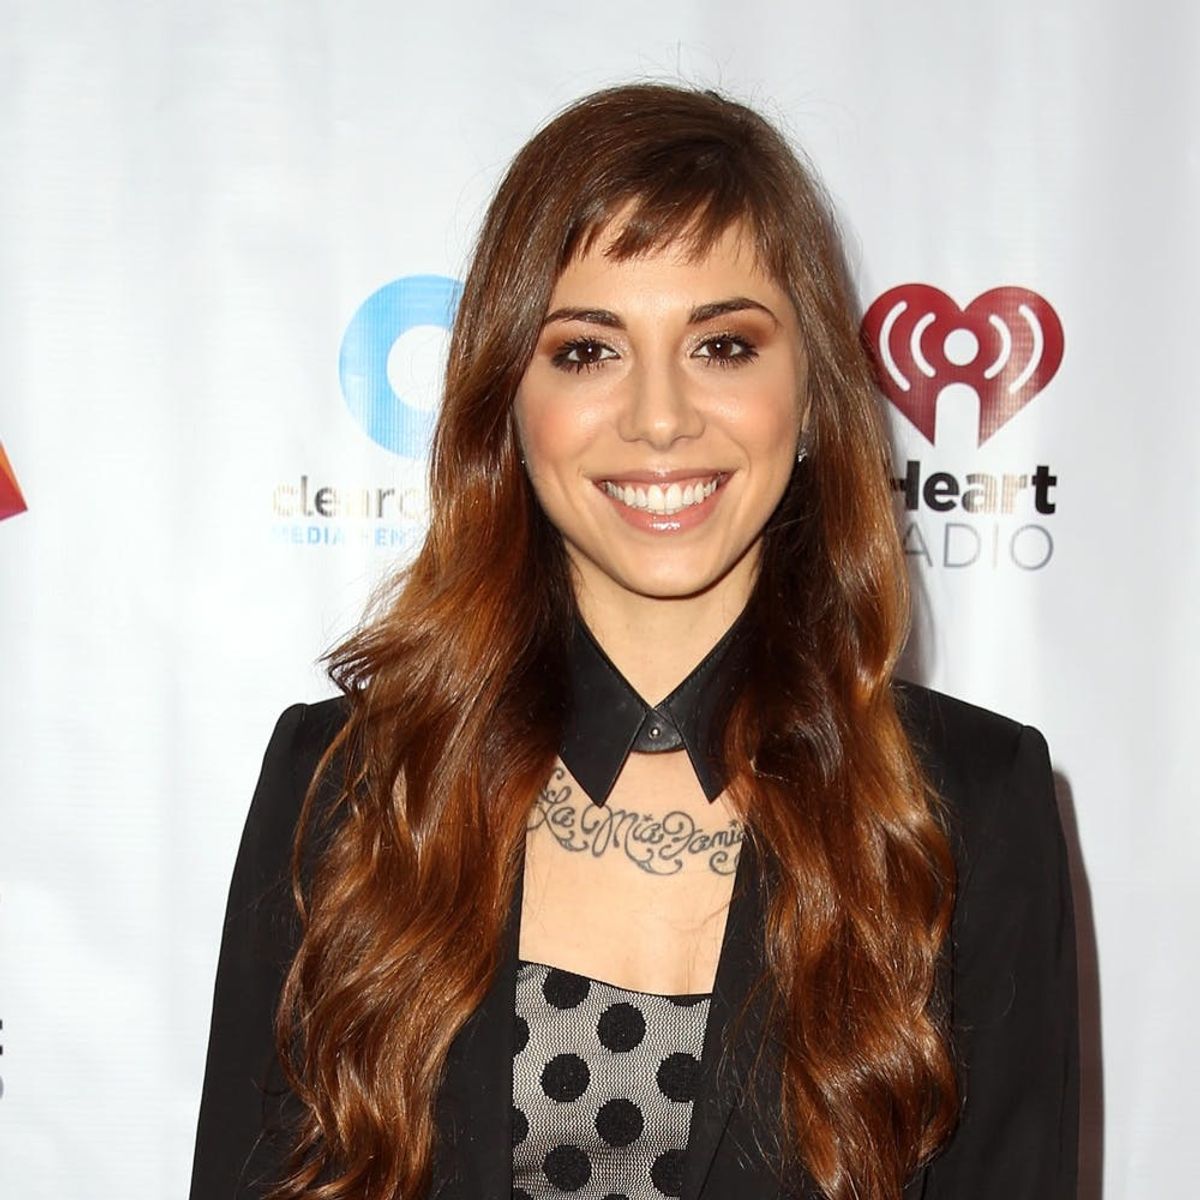 Singer Christina Perri Just Got the Perfect Engagement Ring to Show Off Her Finger Tattoos